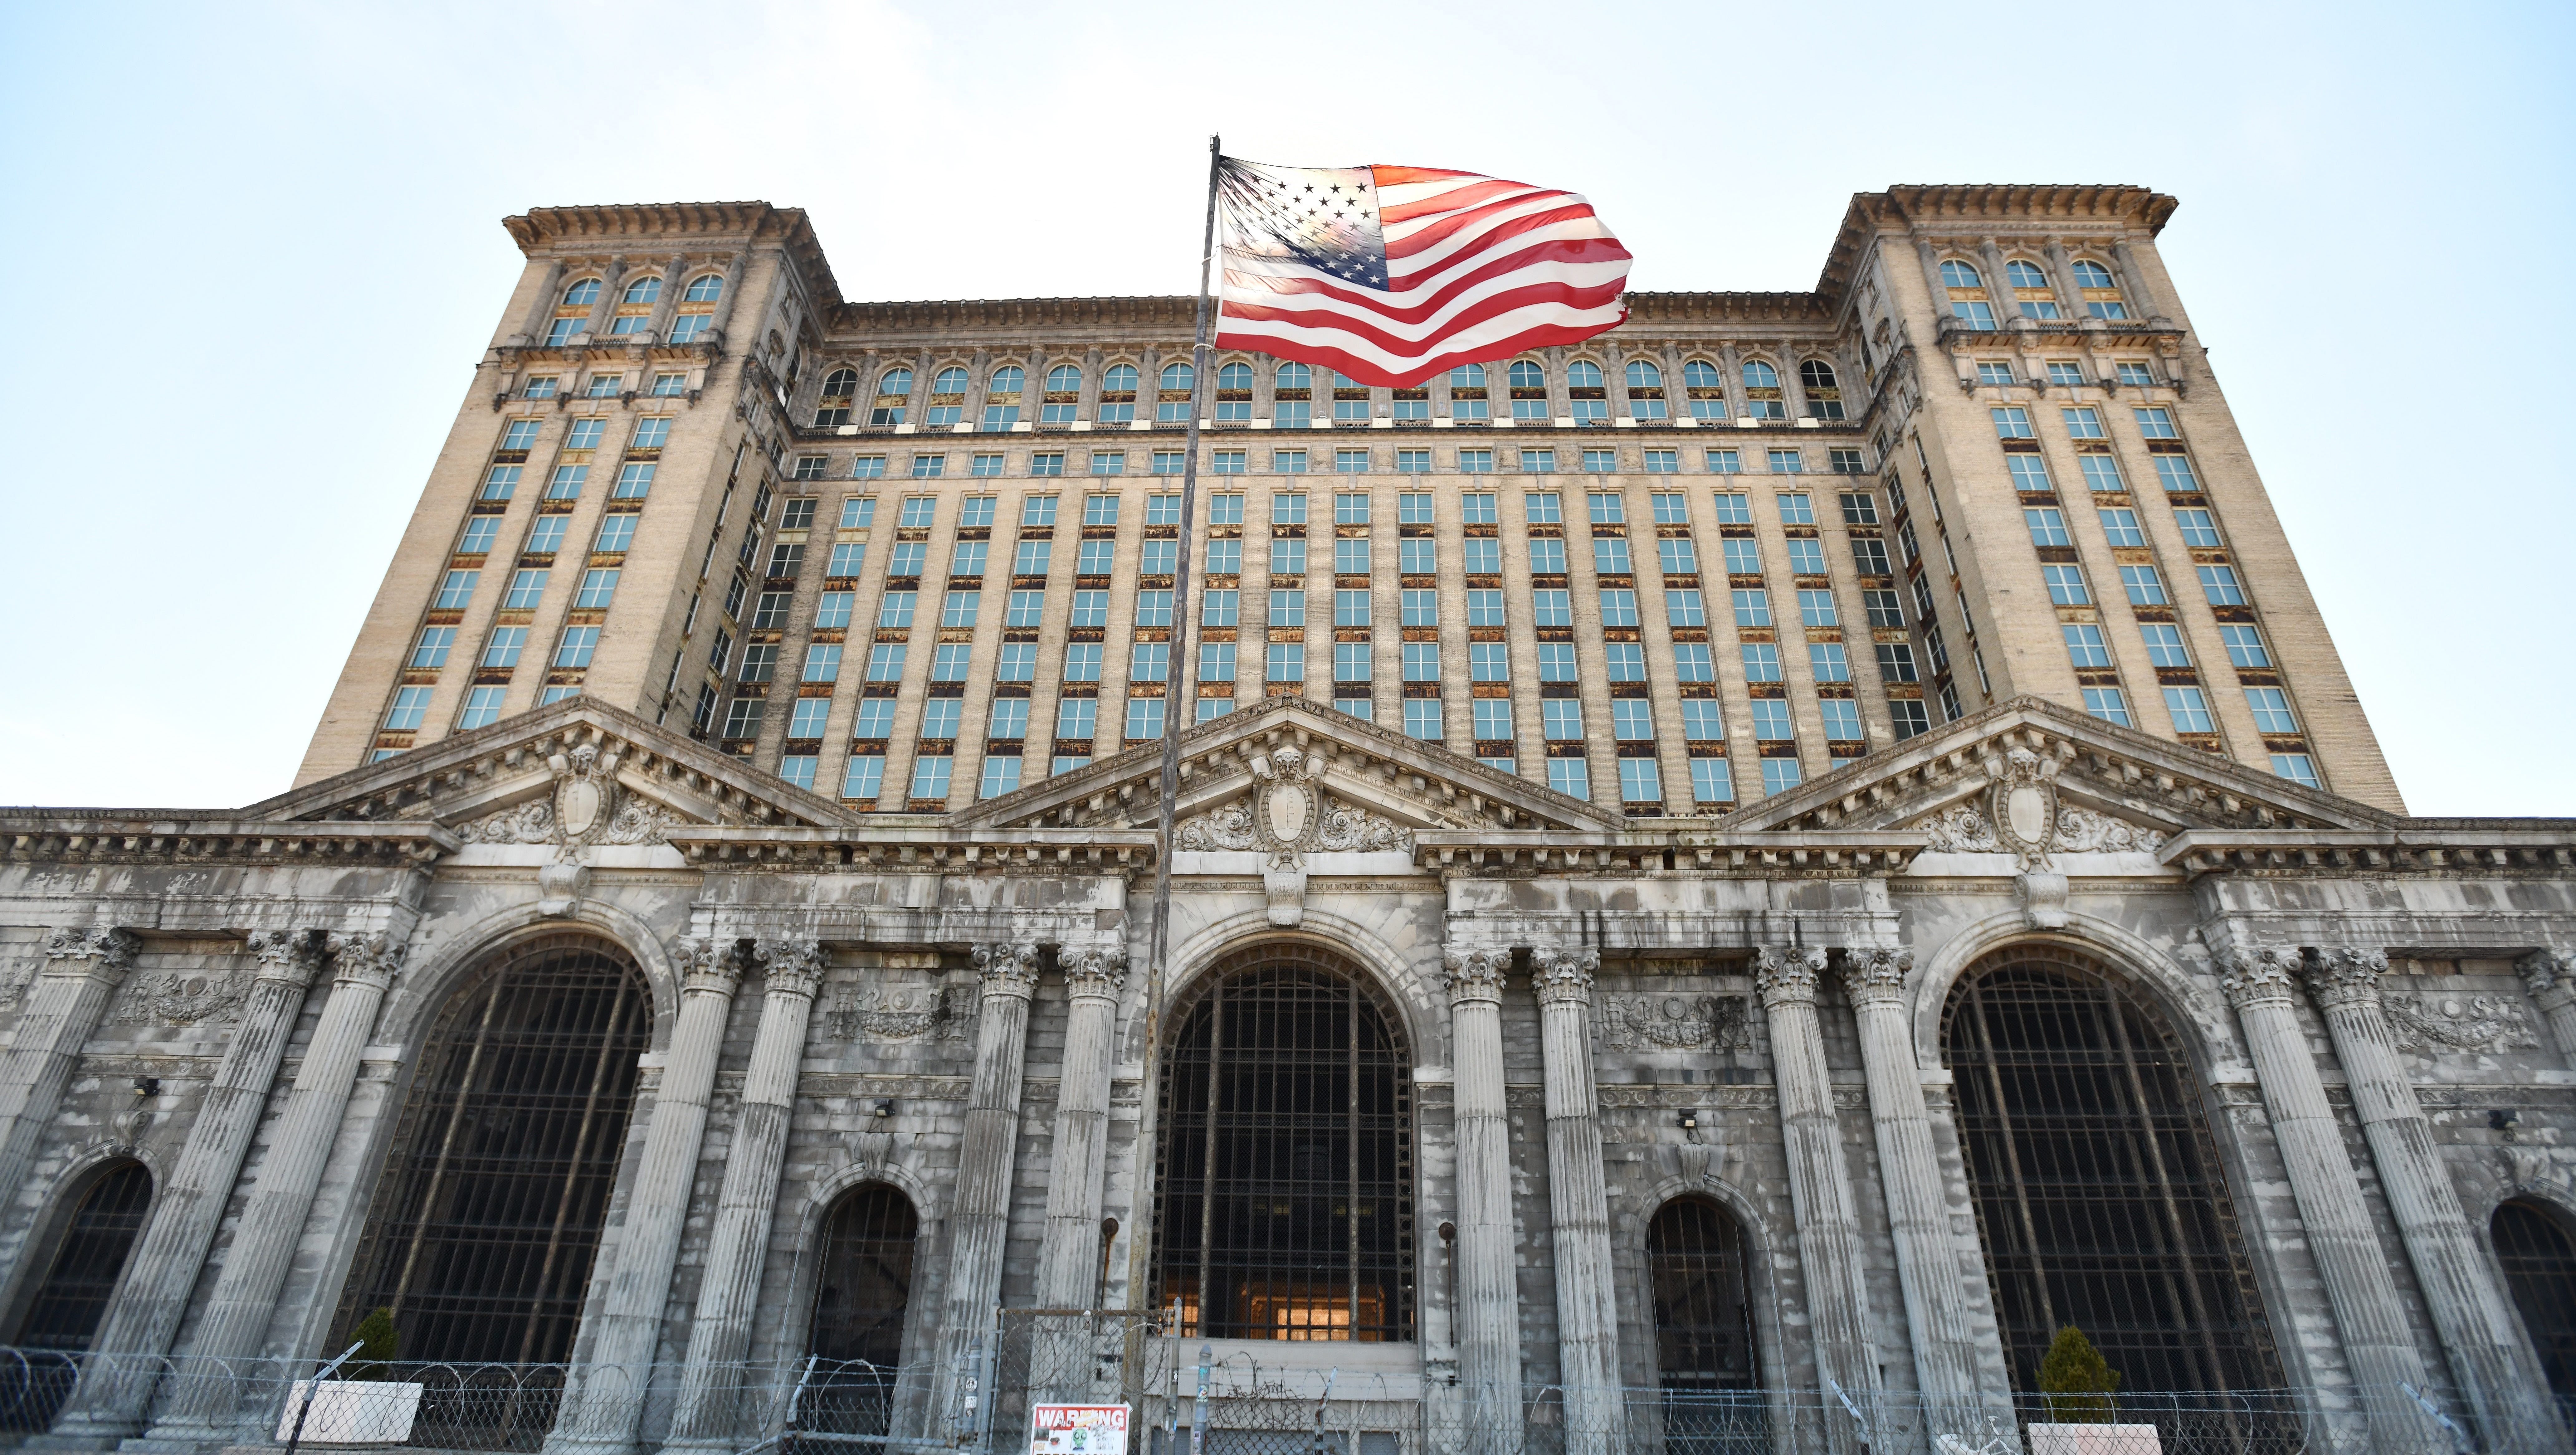 March 19, 2018: Word gets out that Ford Motor Co. is exploring ways to become a major presence in Corktown, including possibly acquiring the Michigan Central Depot.